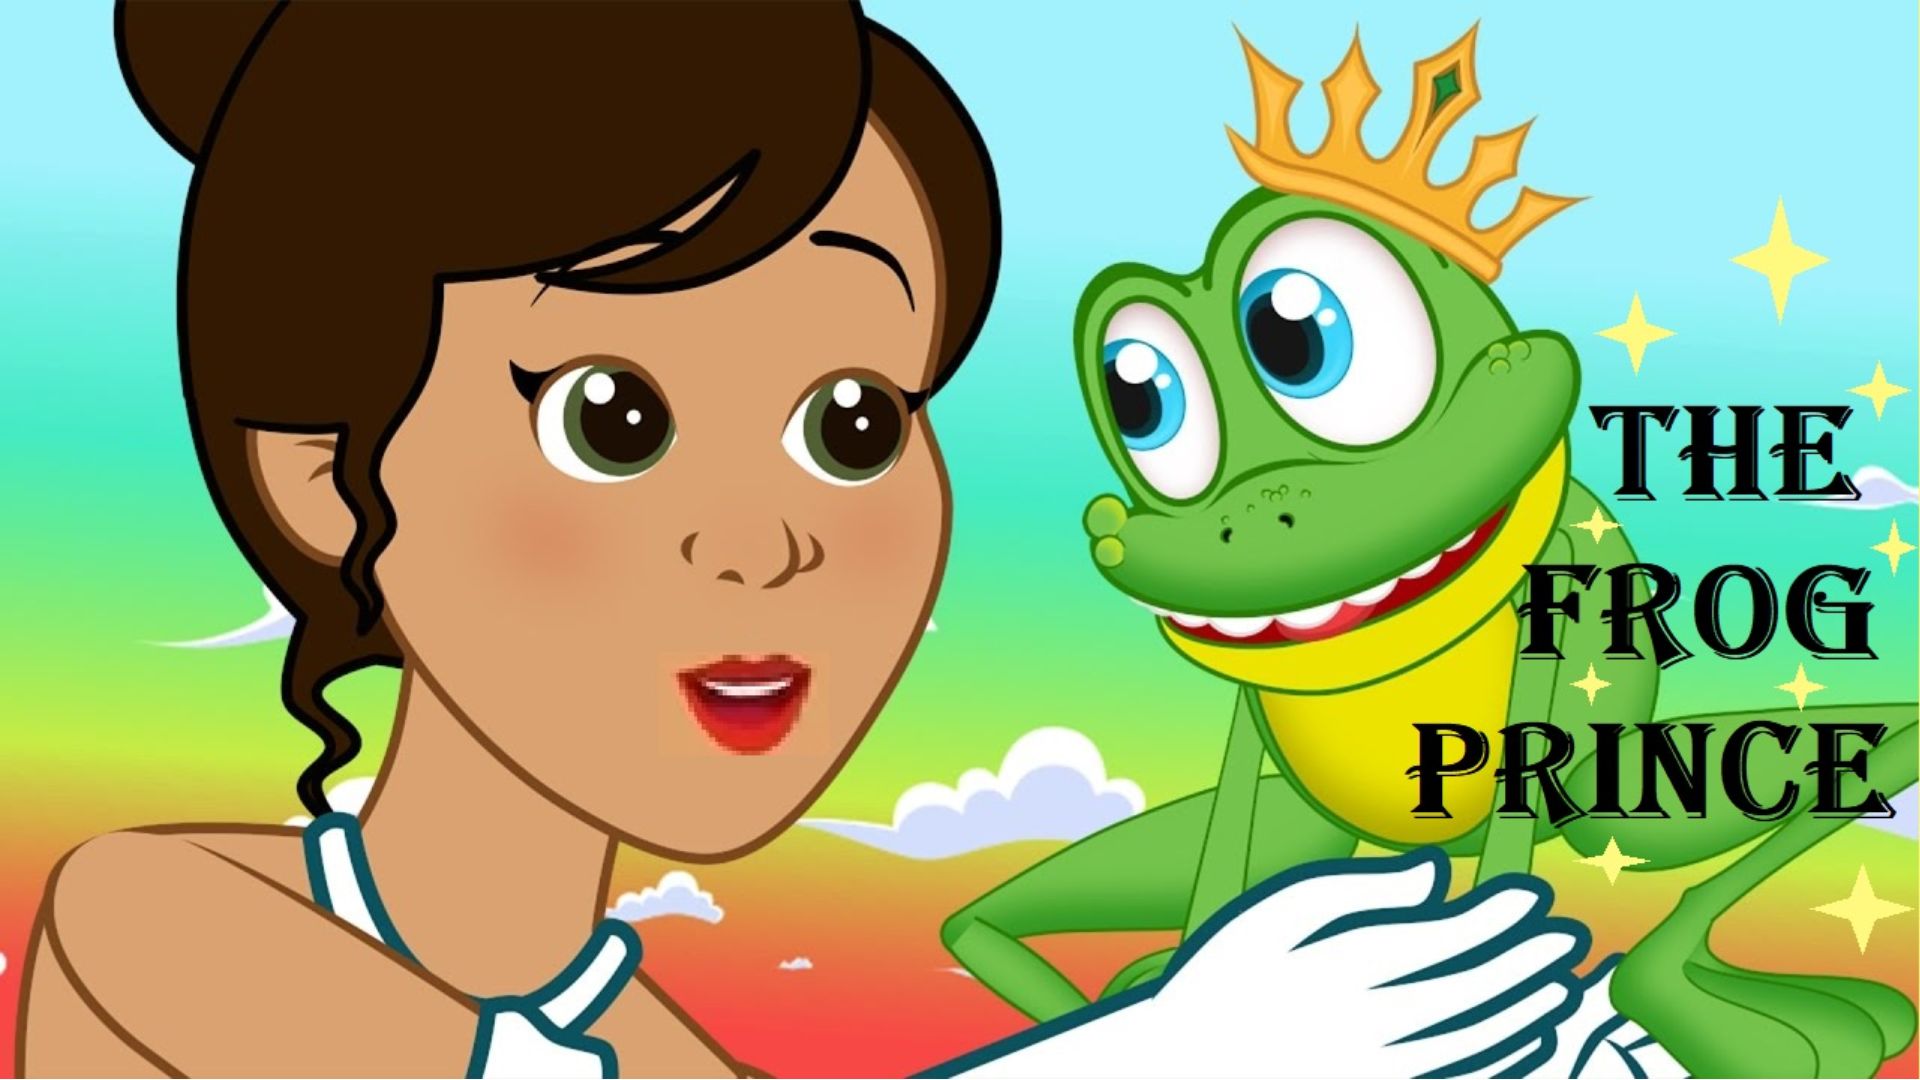 The Princess and the Frog Bedtime Story